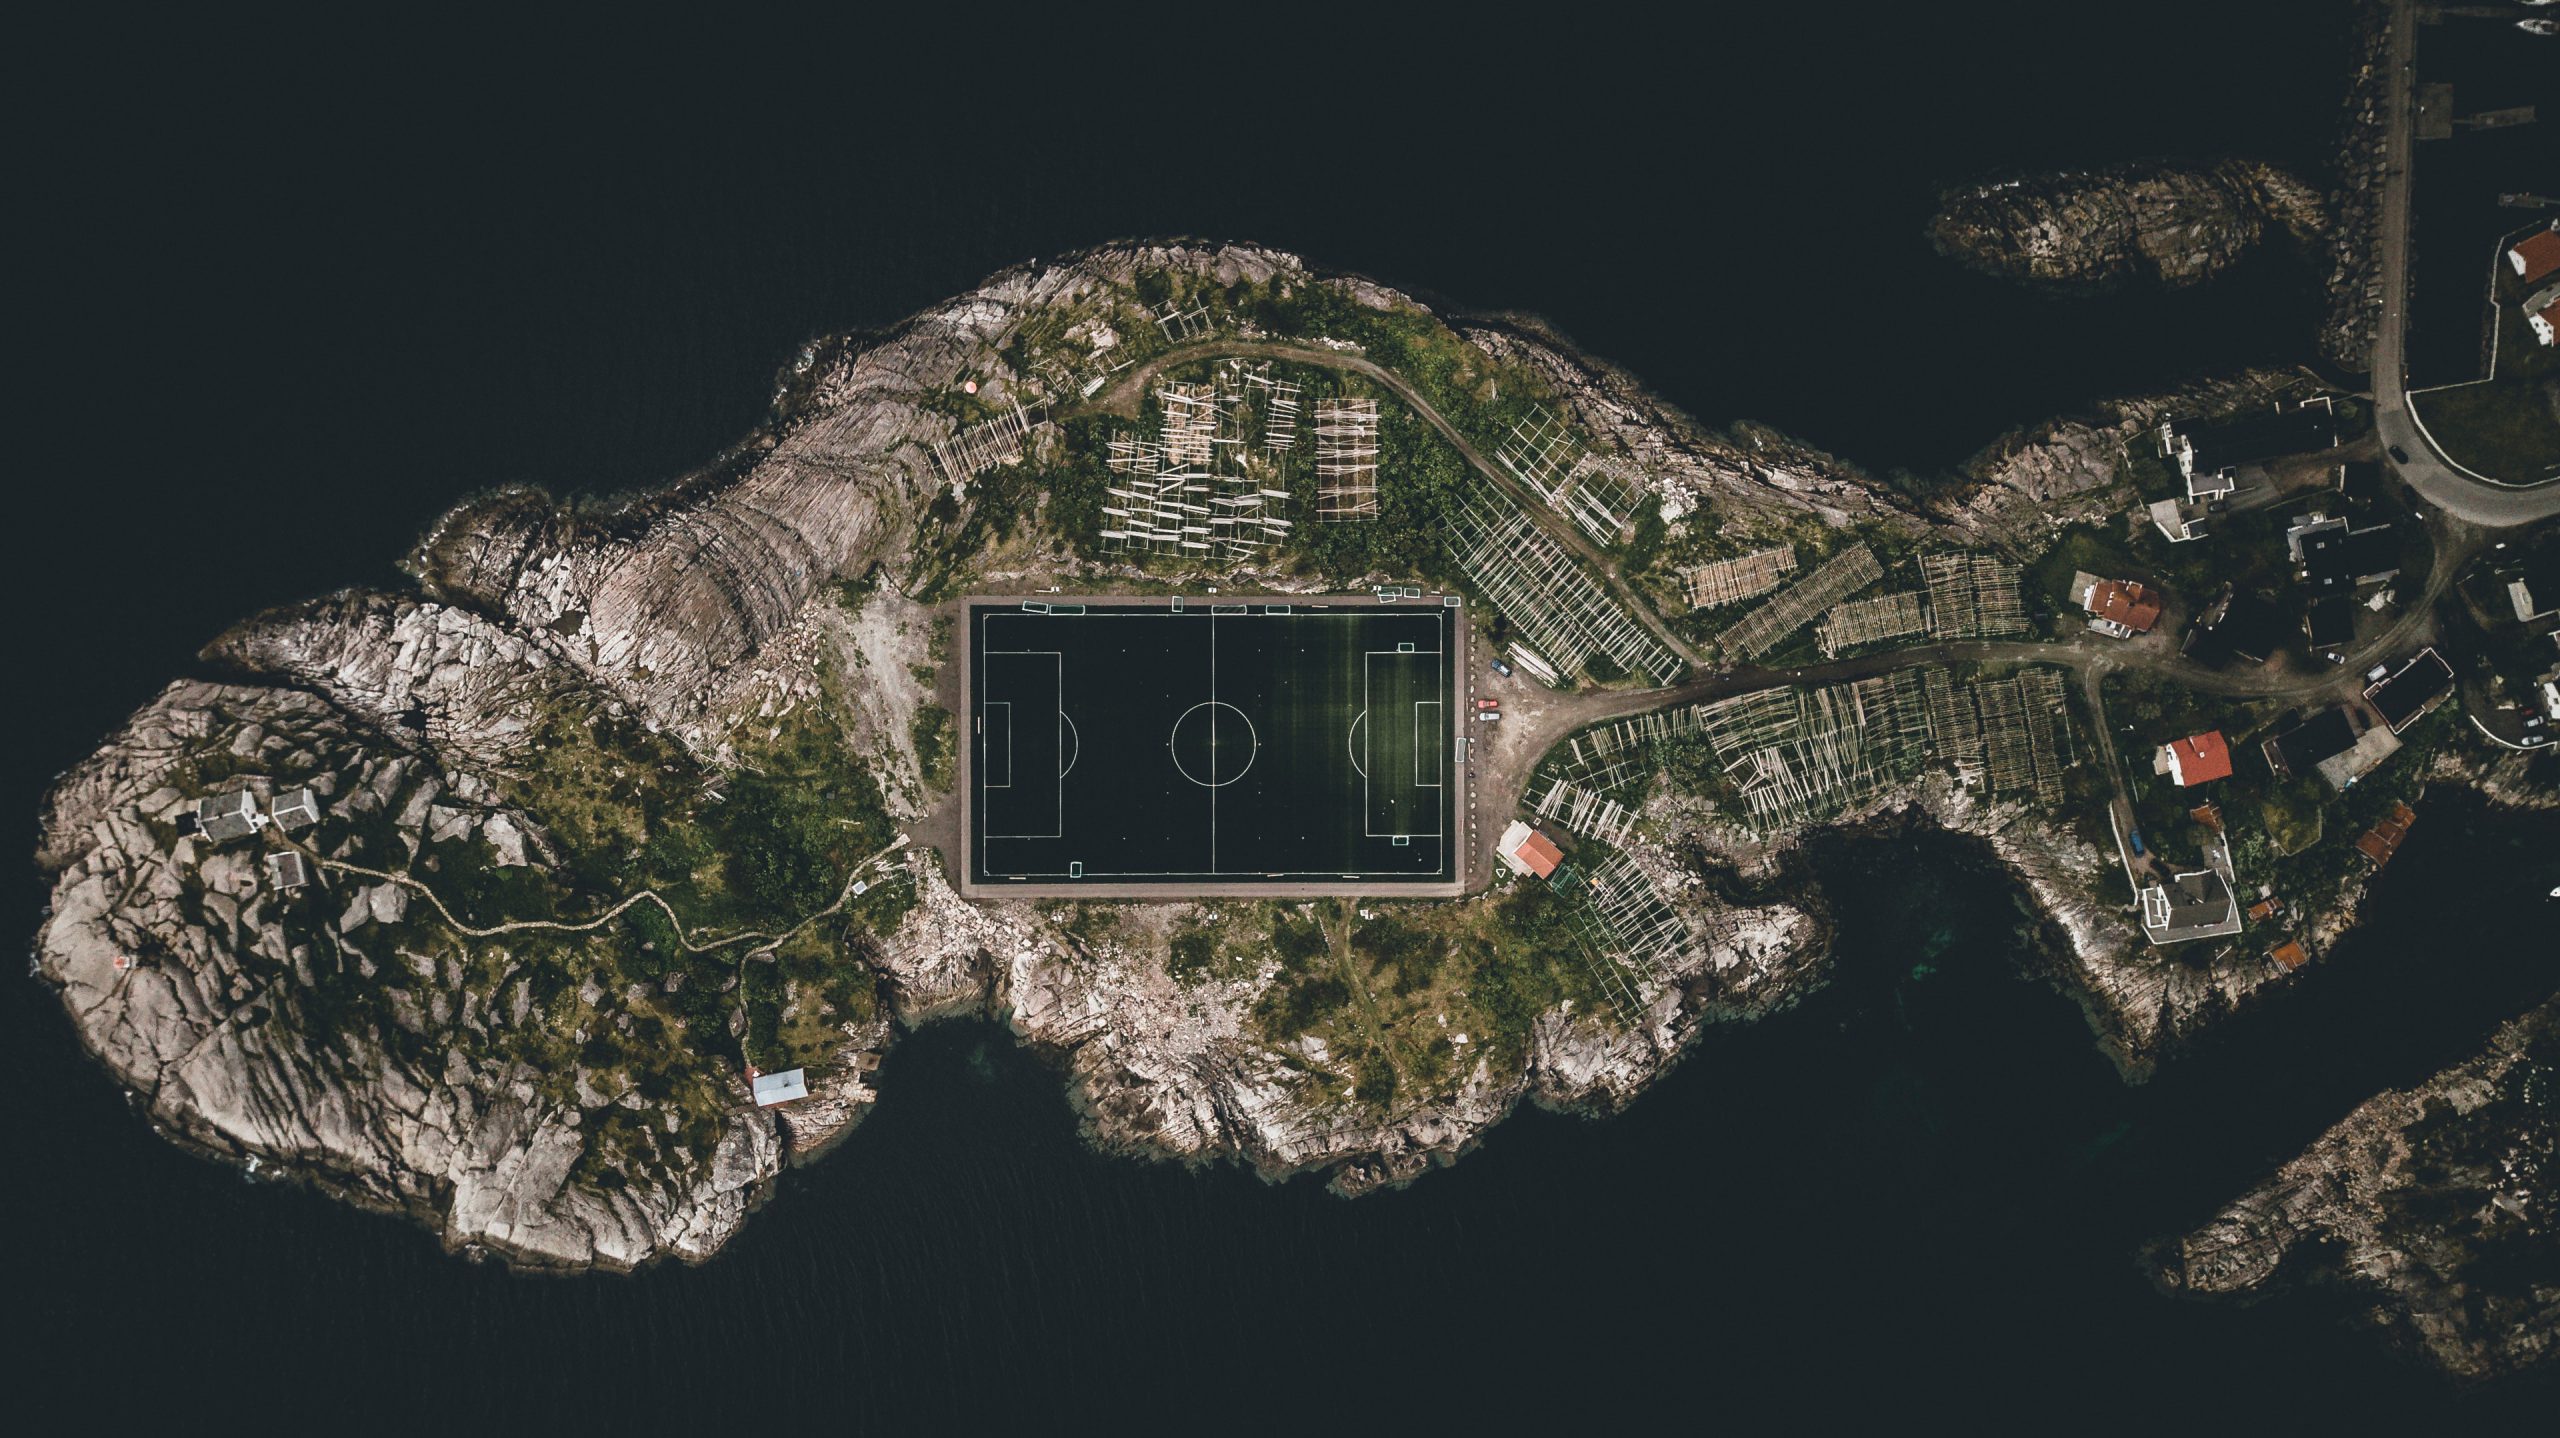 A top-view of a football pitch on a remote headland surrounded by cliffs and the sea